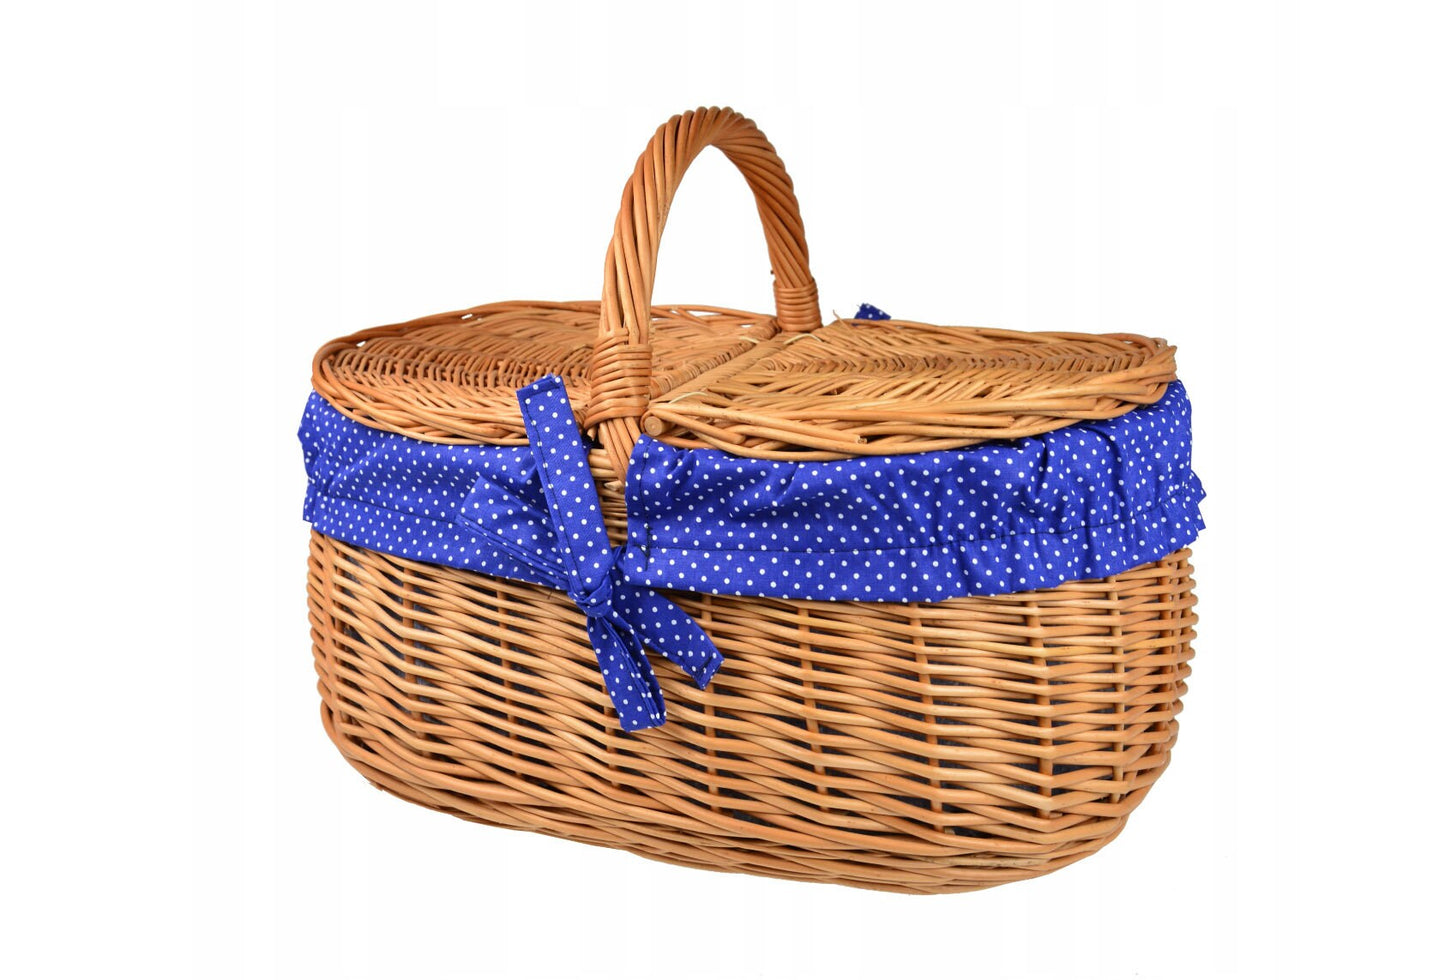 Willow Hand Woven Shopping Basket Wicker Empty Easter Eggs and Candy Small Gift Basket  Easter, Picnics, Gifts, Home Decor Cotton Cloth